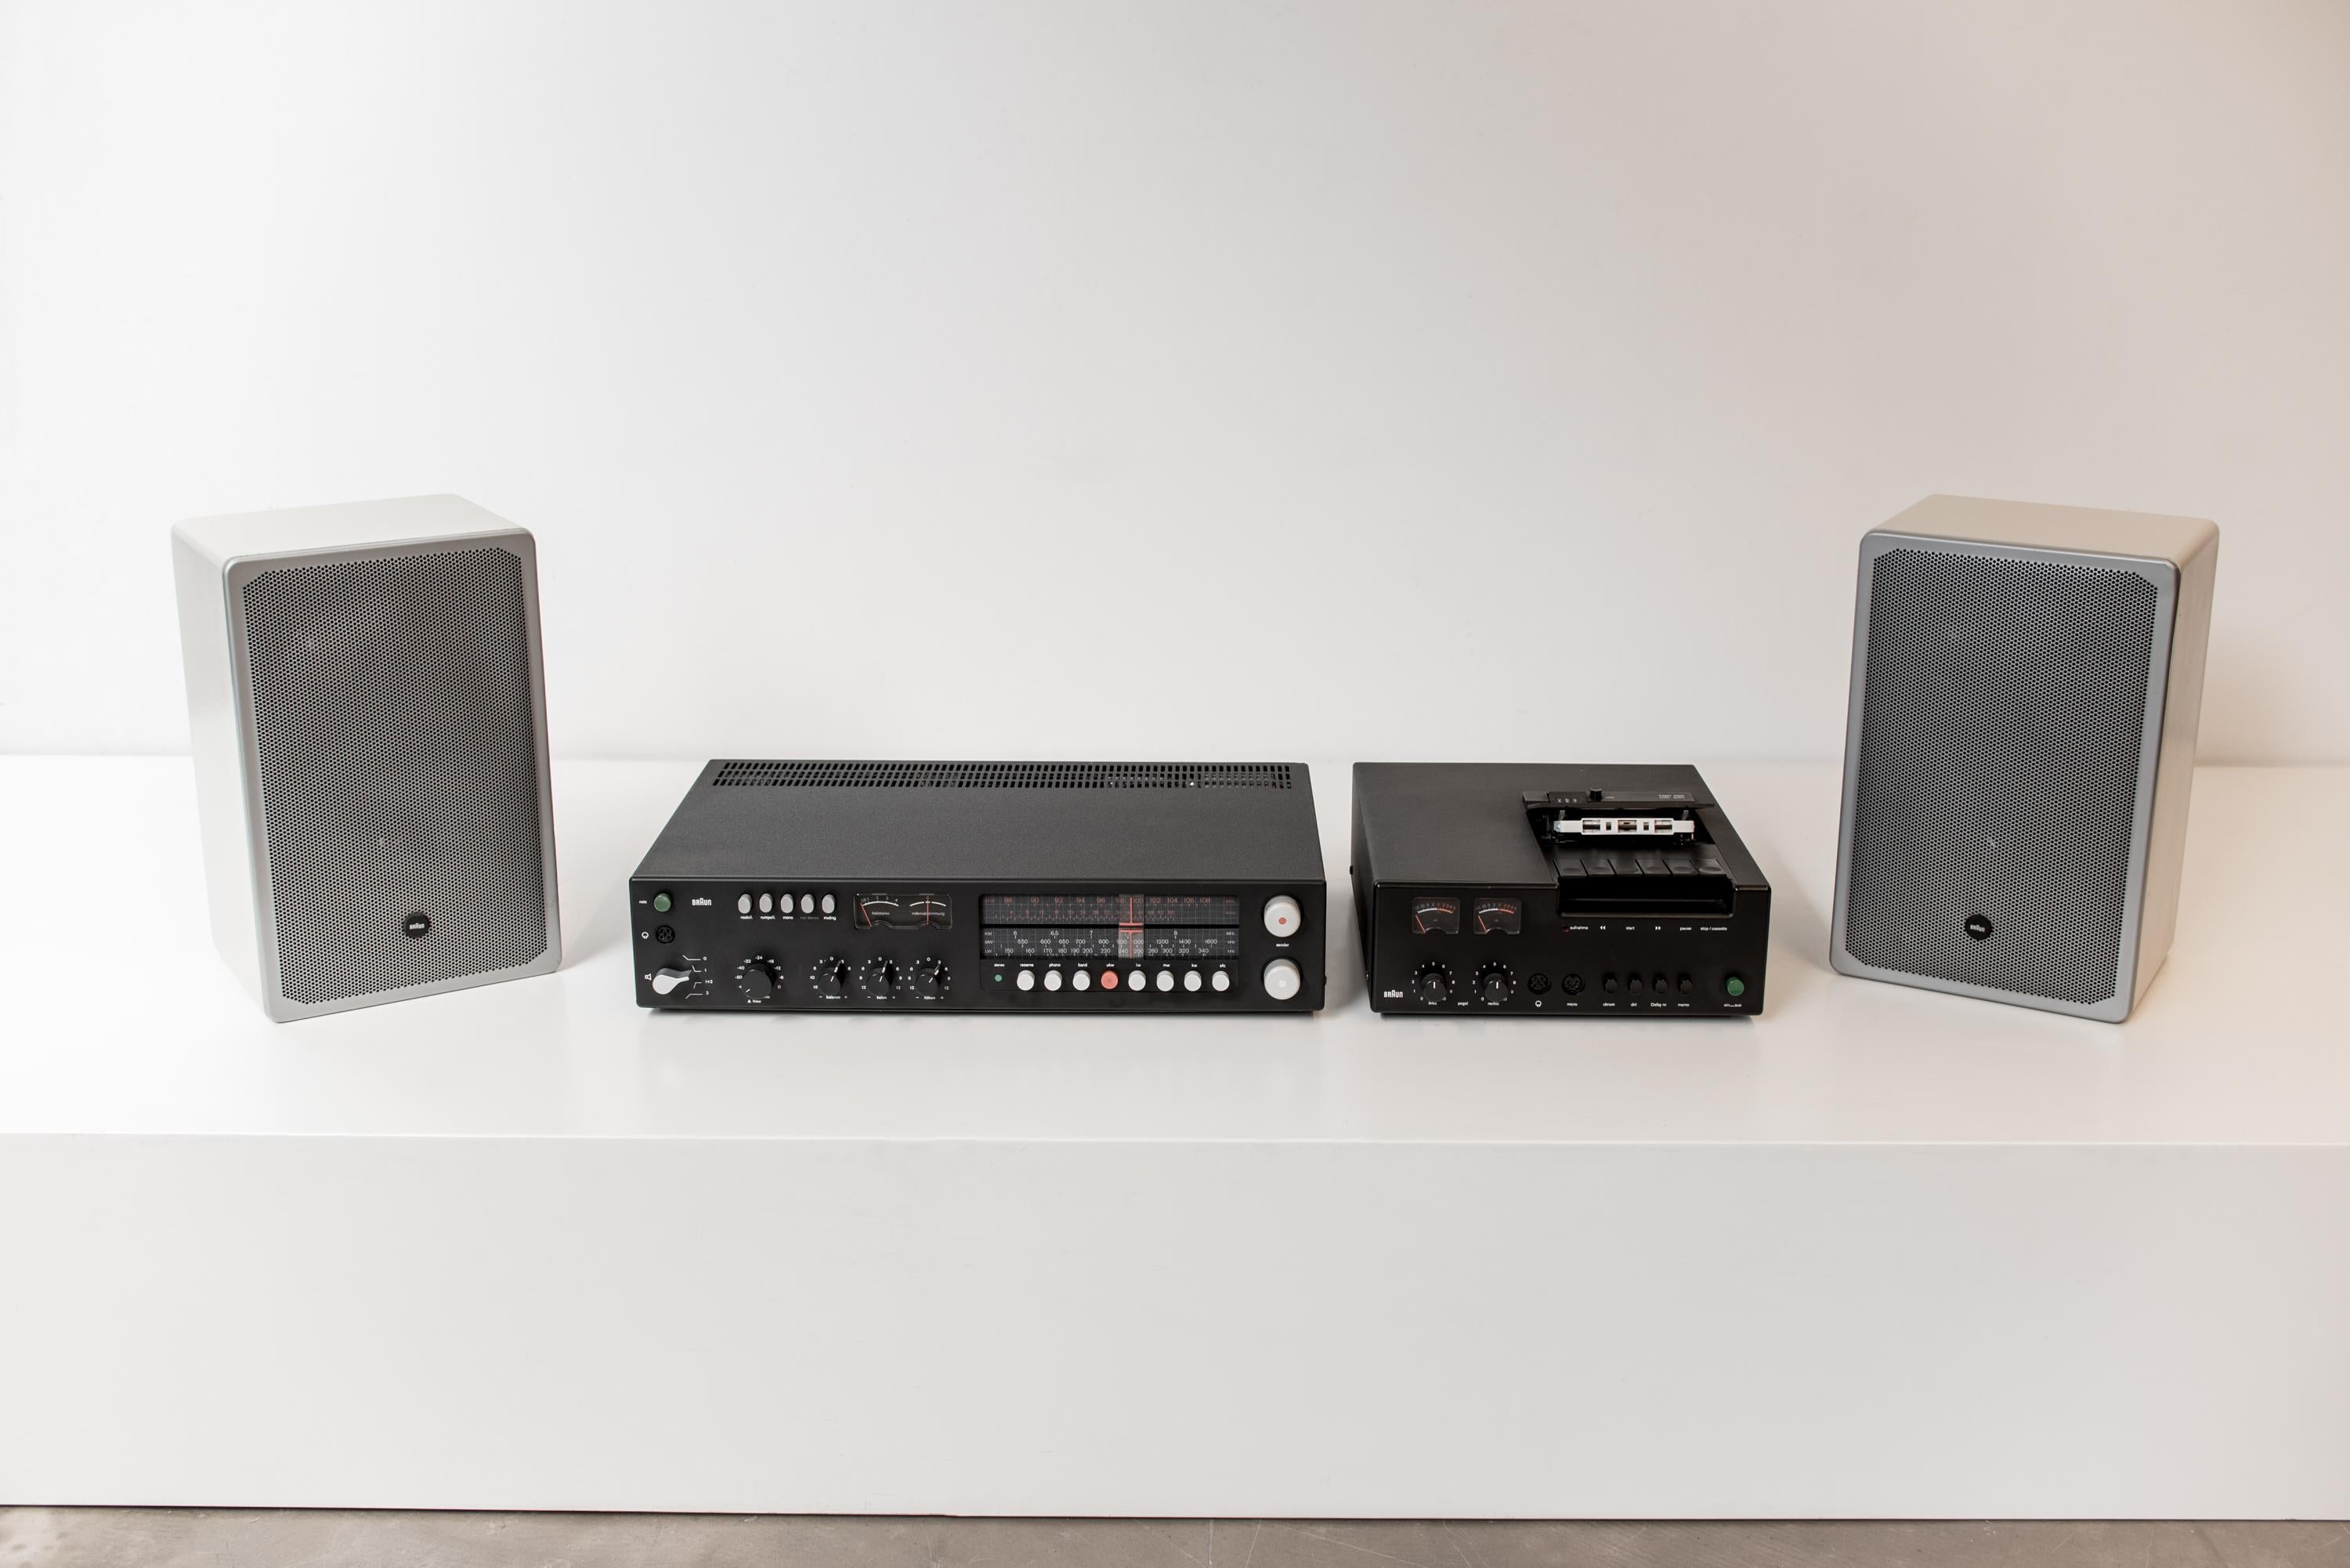 Complete Braun analogue audio system, designer by Dieter Rams, 1975.
Consists of tapedeck player TGC 450, Receiver/amplifier CEV 510 and L530 speakers.
Fully serviced by a professional technician. Age-related signs of wear. Plays great like high